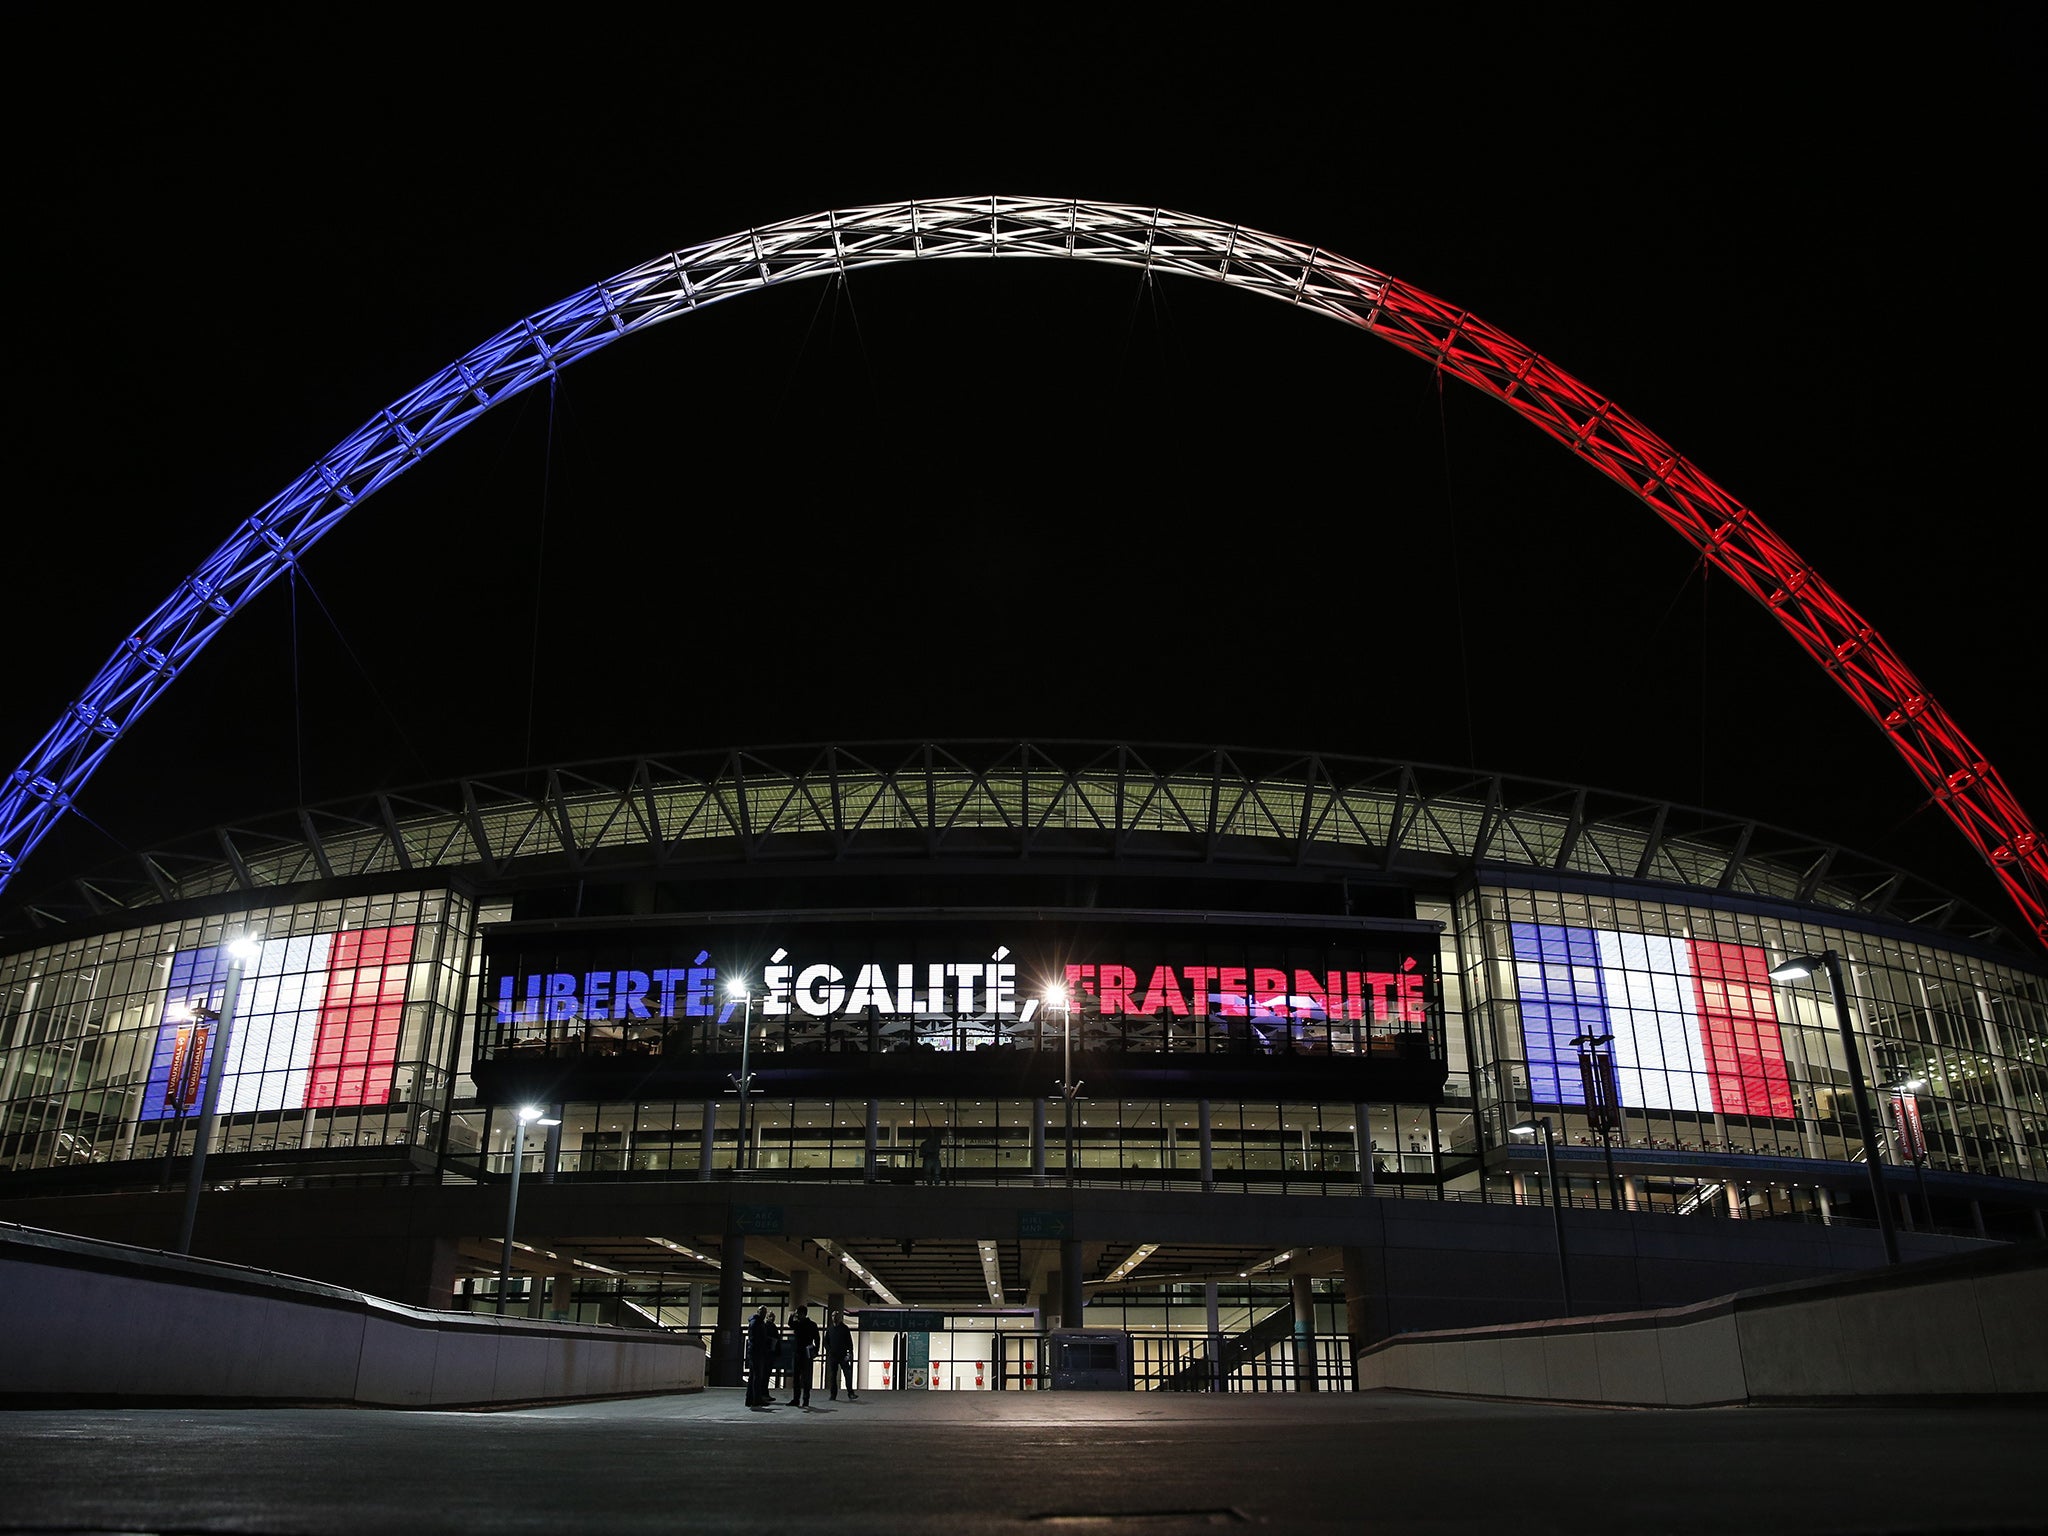 Wembley lit in the colours of the French flag